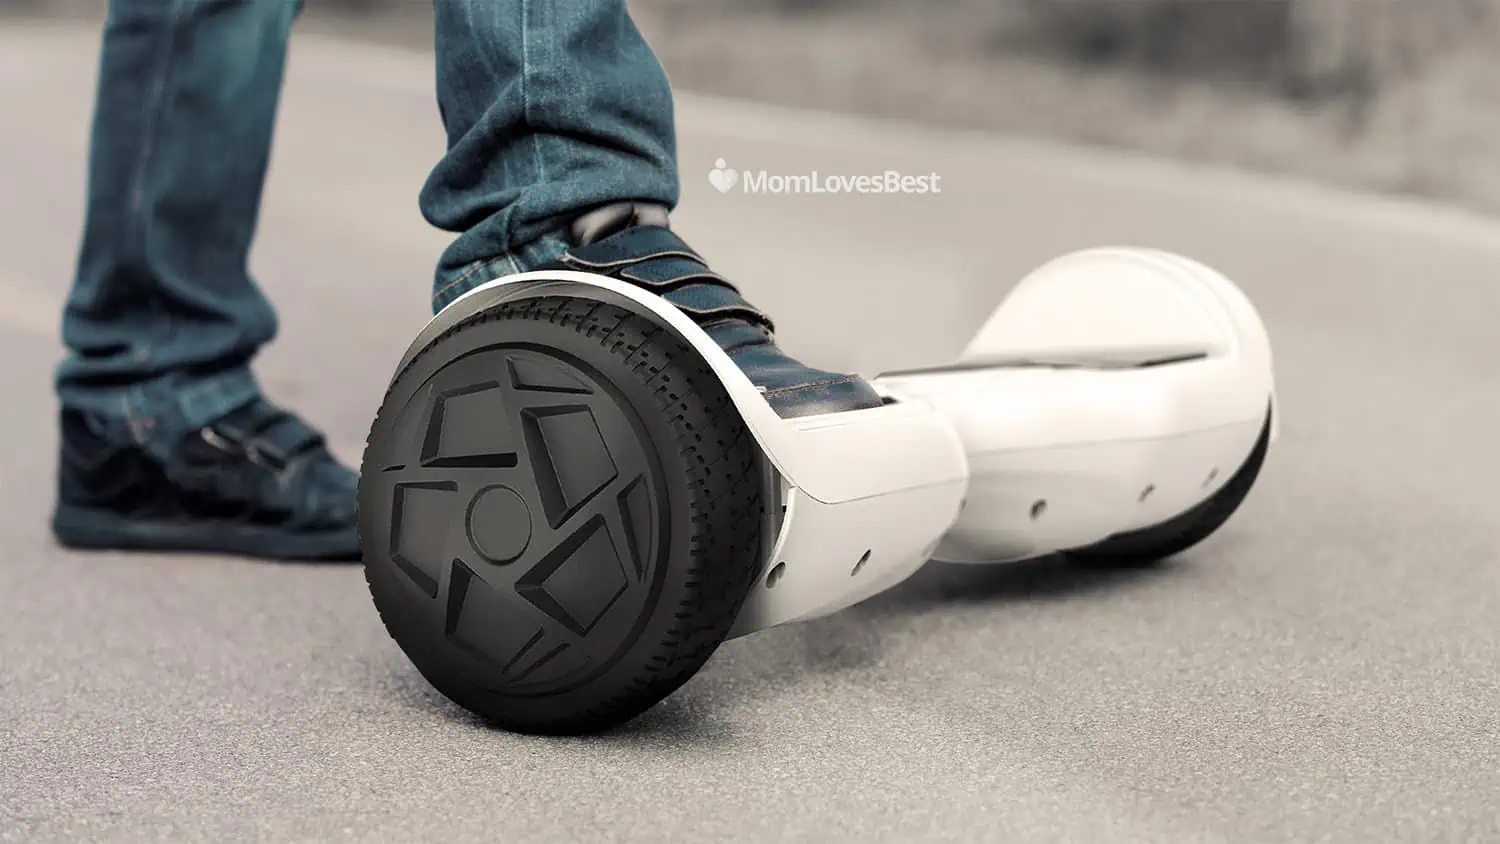 Photo of the Uni-Sun Hoverboard for Kids